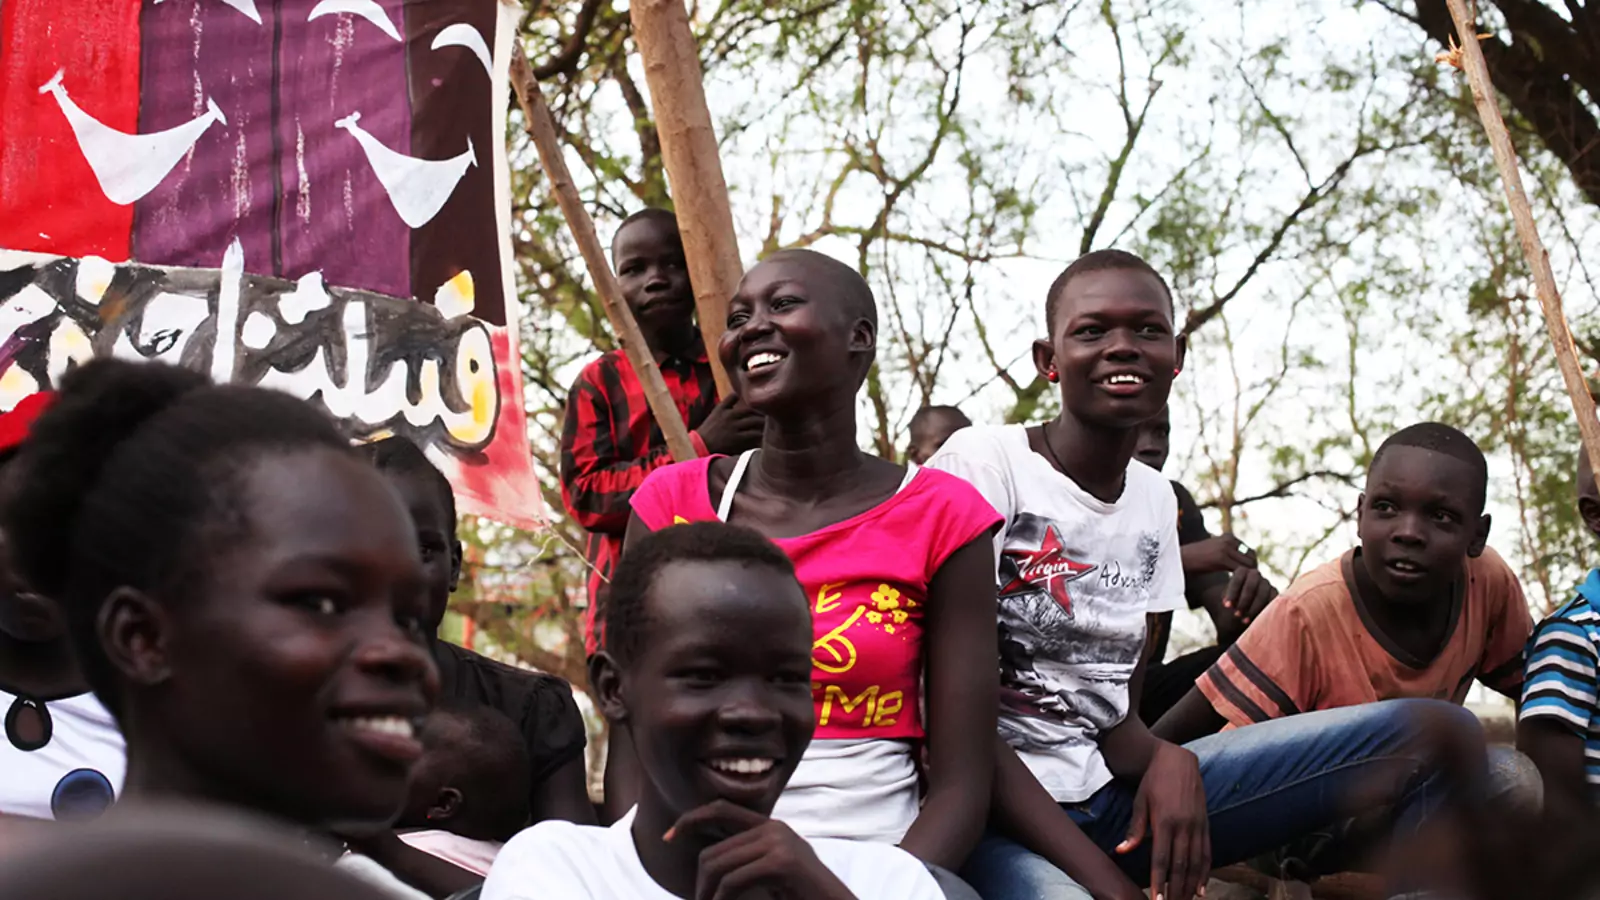 Young South Sudanese attend an open mic event in the capital, Juba.